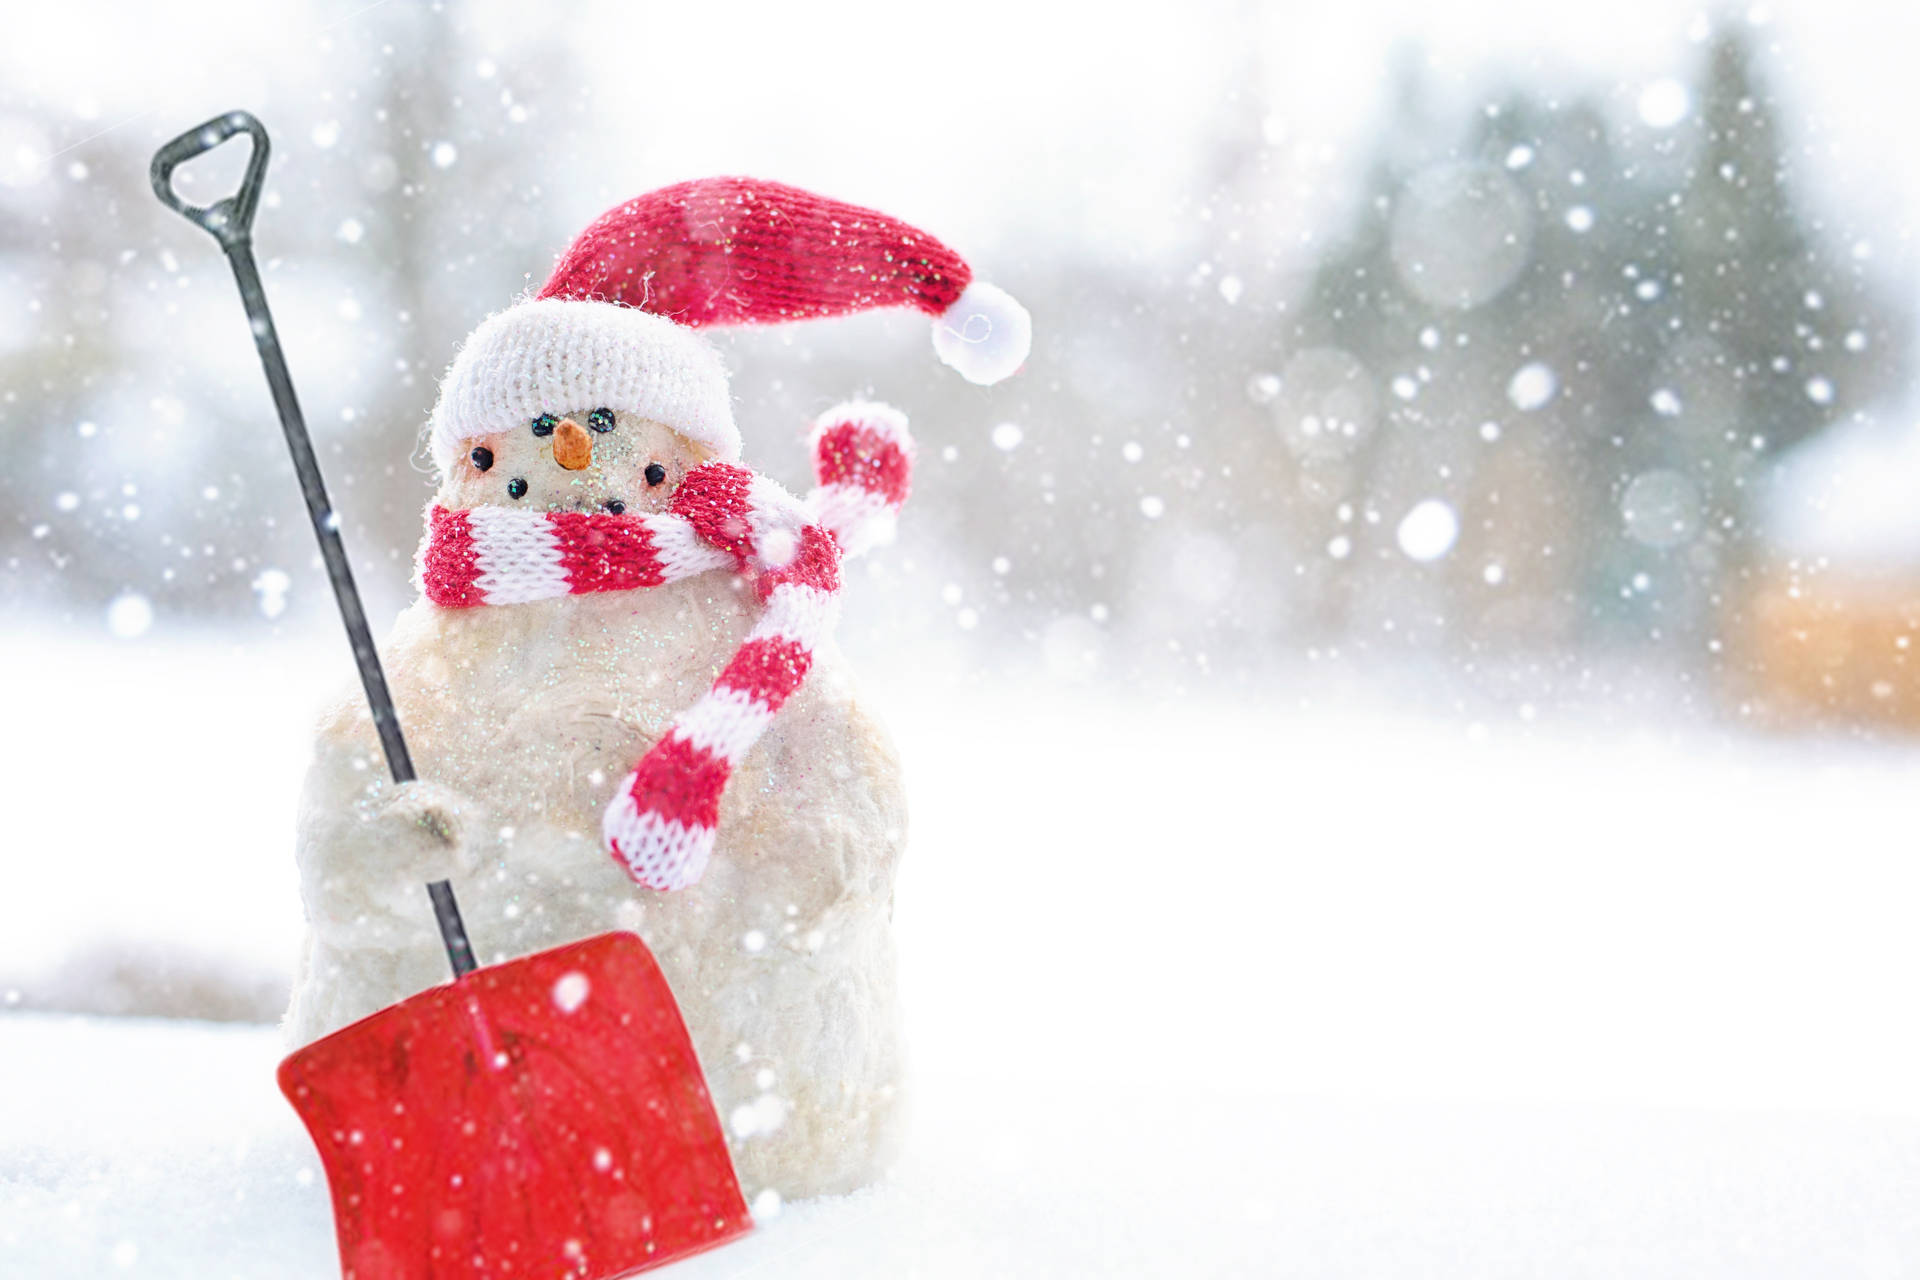 A Snowman With A Shovel In The Snow Wallpaper